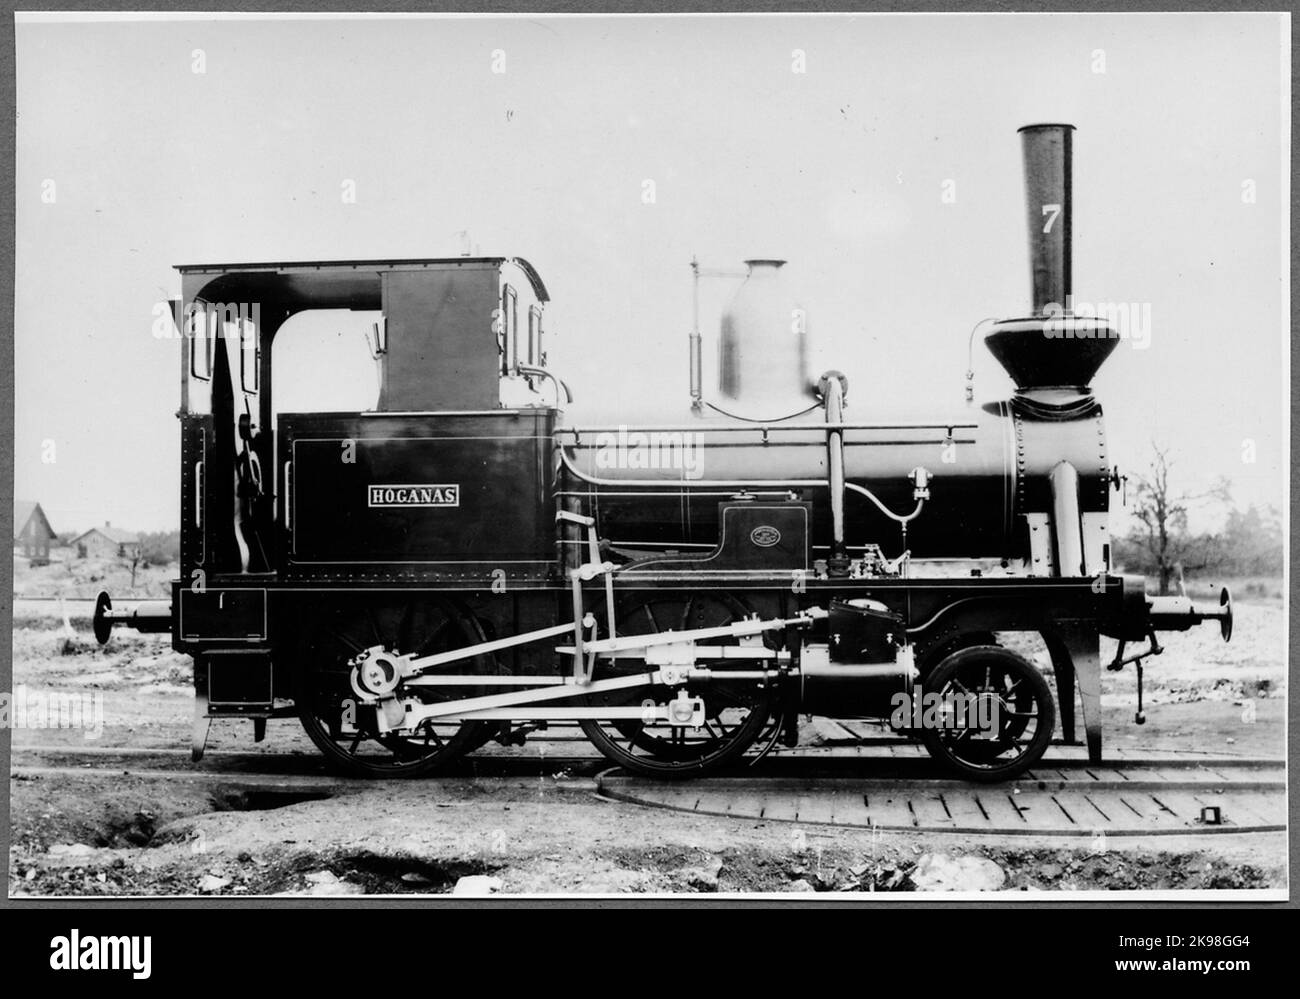 Delivery photo, Skåne Halaland Railway, Shj Lok 7 'Höganäs', made in 1884 by Nohab. In 1896, the locomotive was sold to the State Railways and got Littera SJ VKBI 501. It was scrapped in 1935. Stock Photo